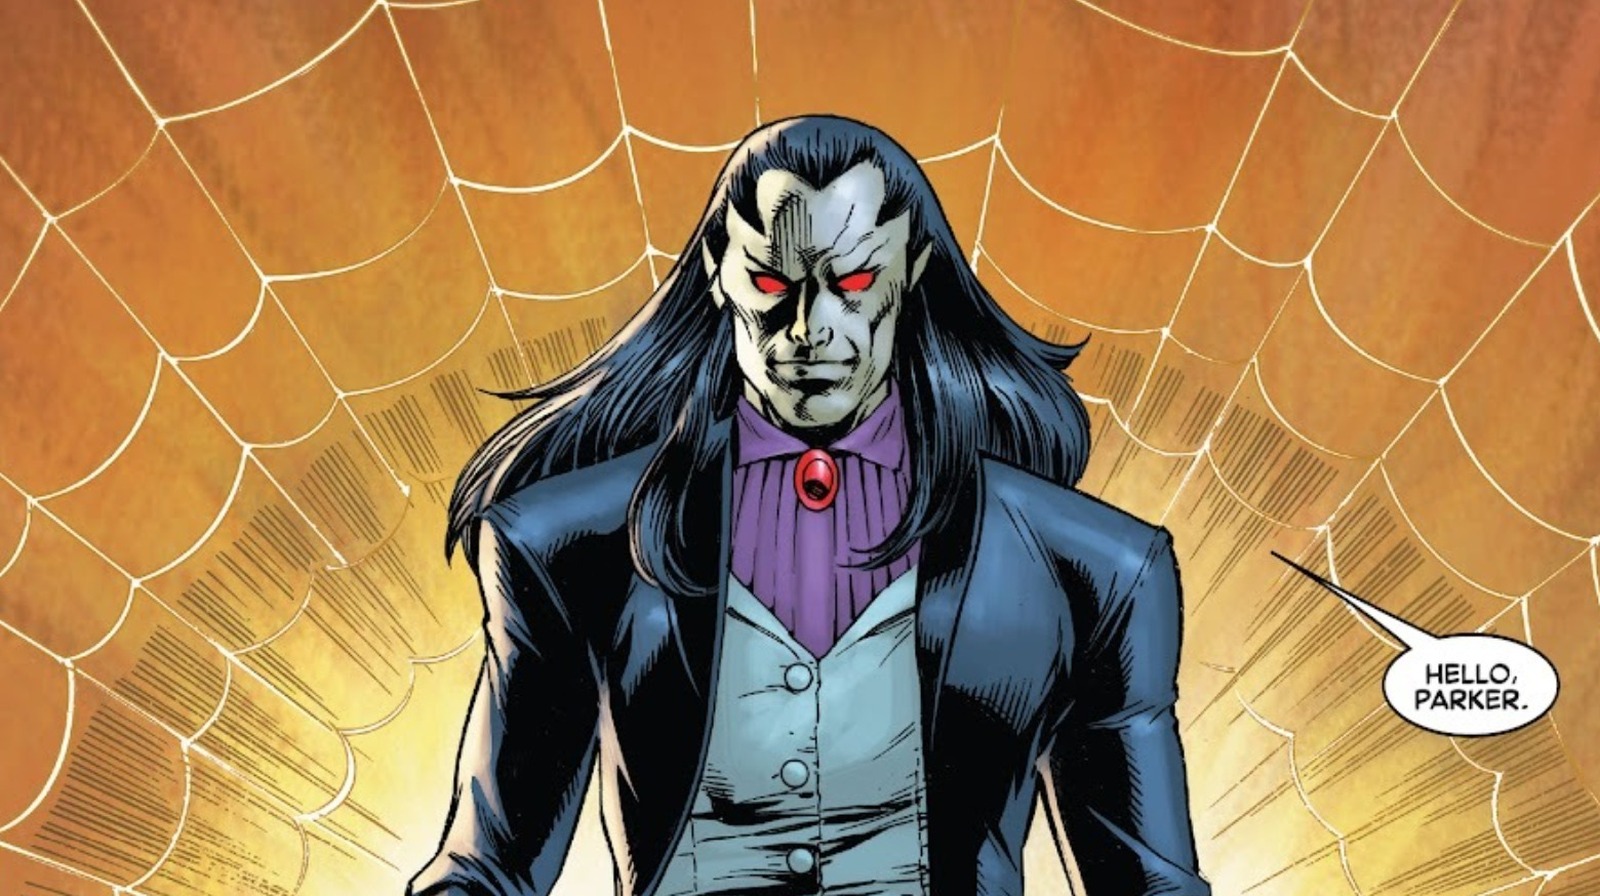 Morlun from Spider-Man comic book